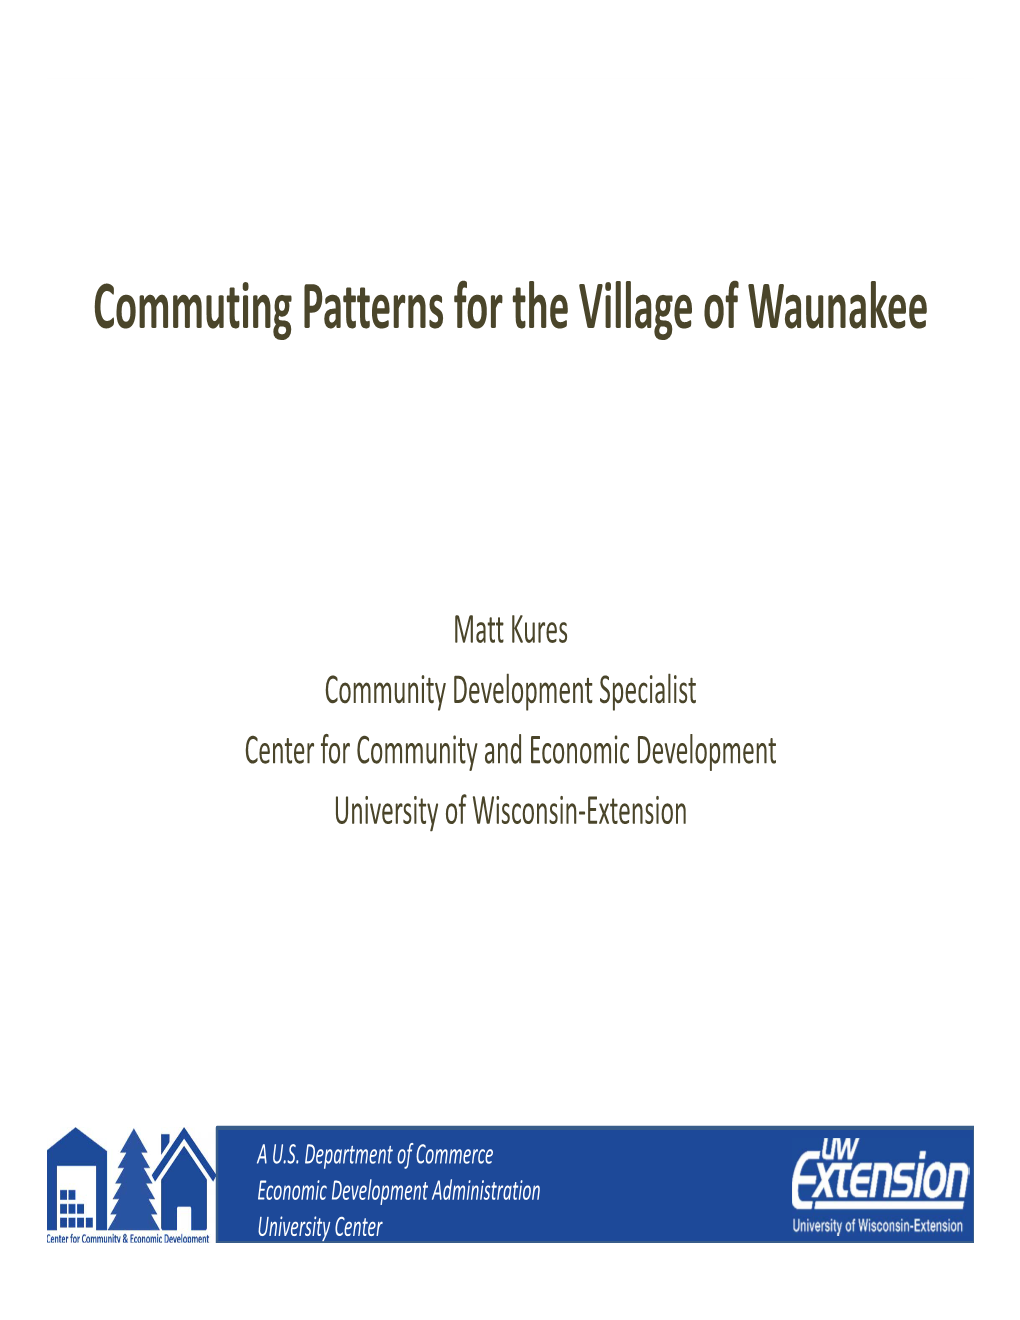 Commuting Patterns for the Village of Waunakee